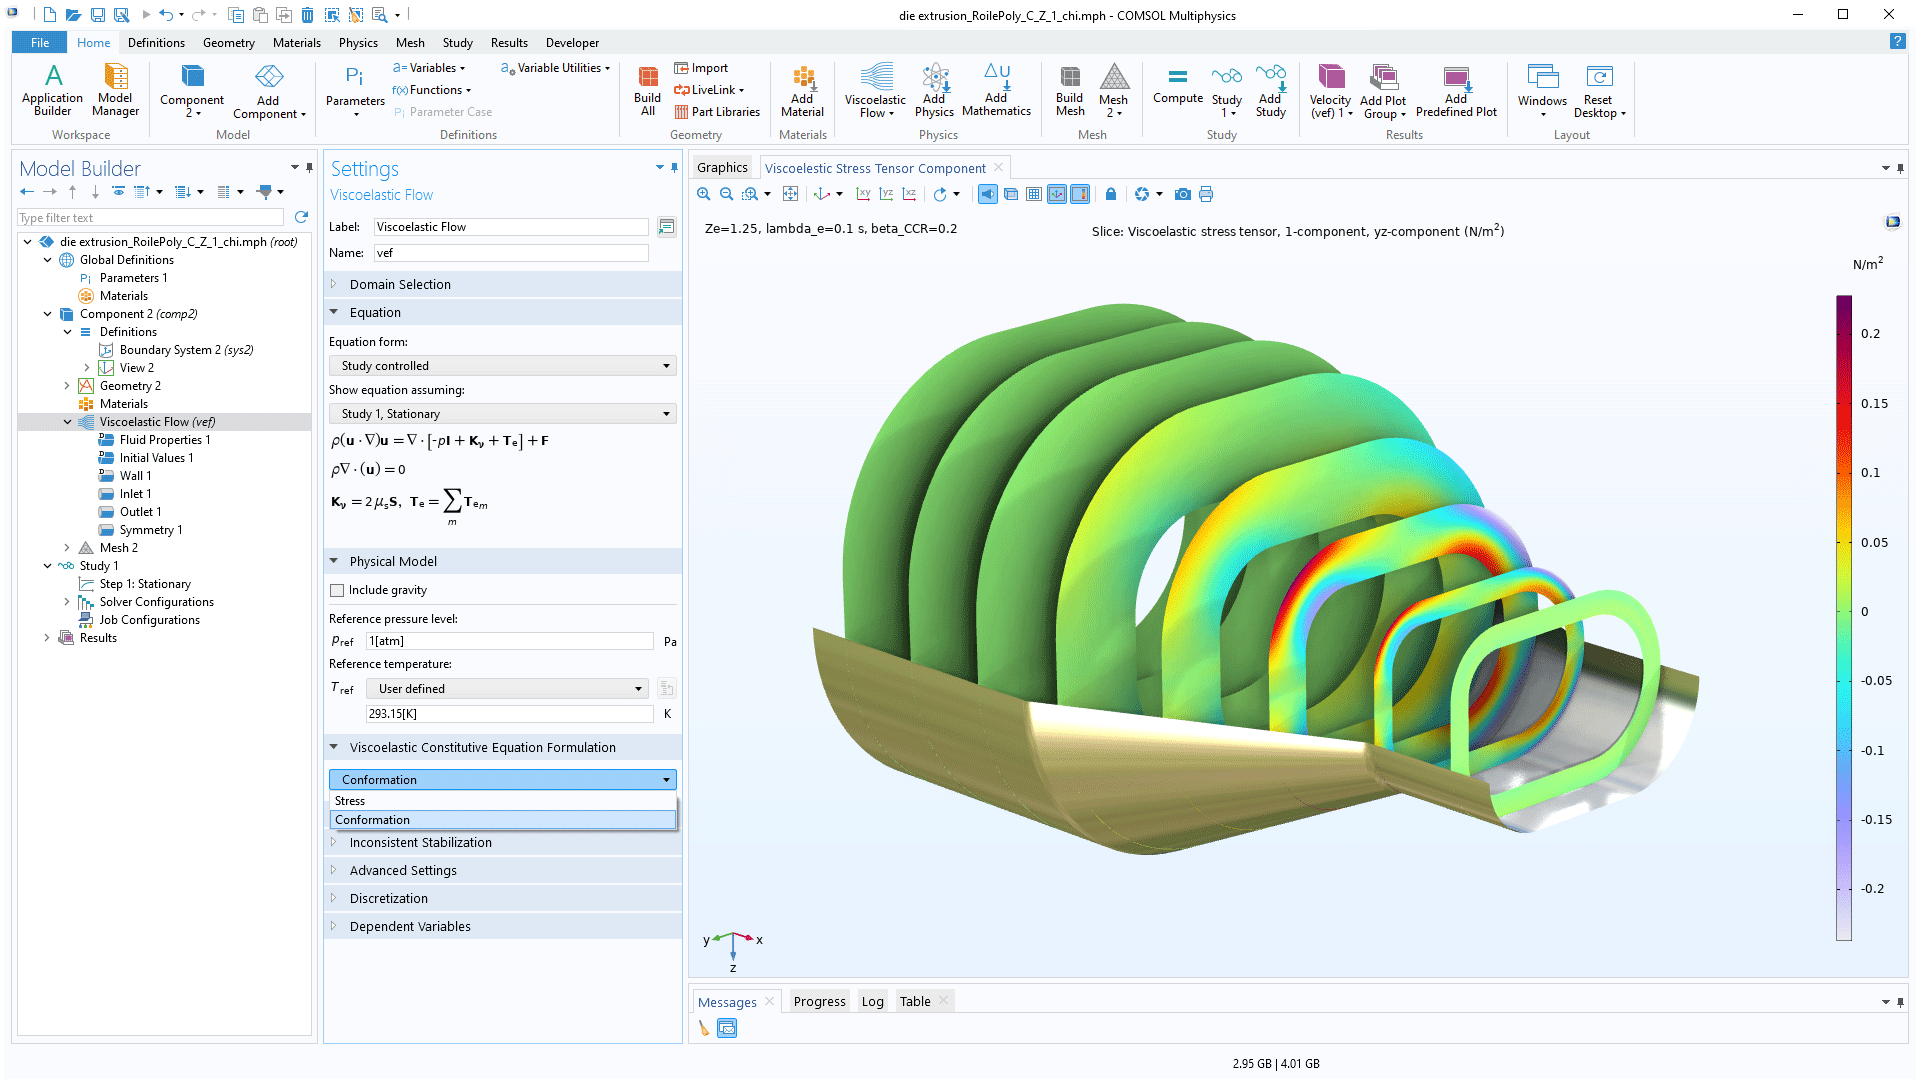 The COMSOL Multiphysics UI showing the Model Builder with the Viscoelastic Flow node highlighted, the corresponding Settings window, and a die extrusion model in the Graphics window.